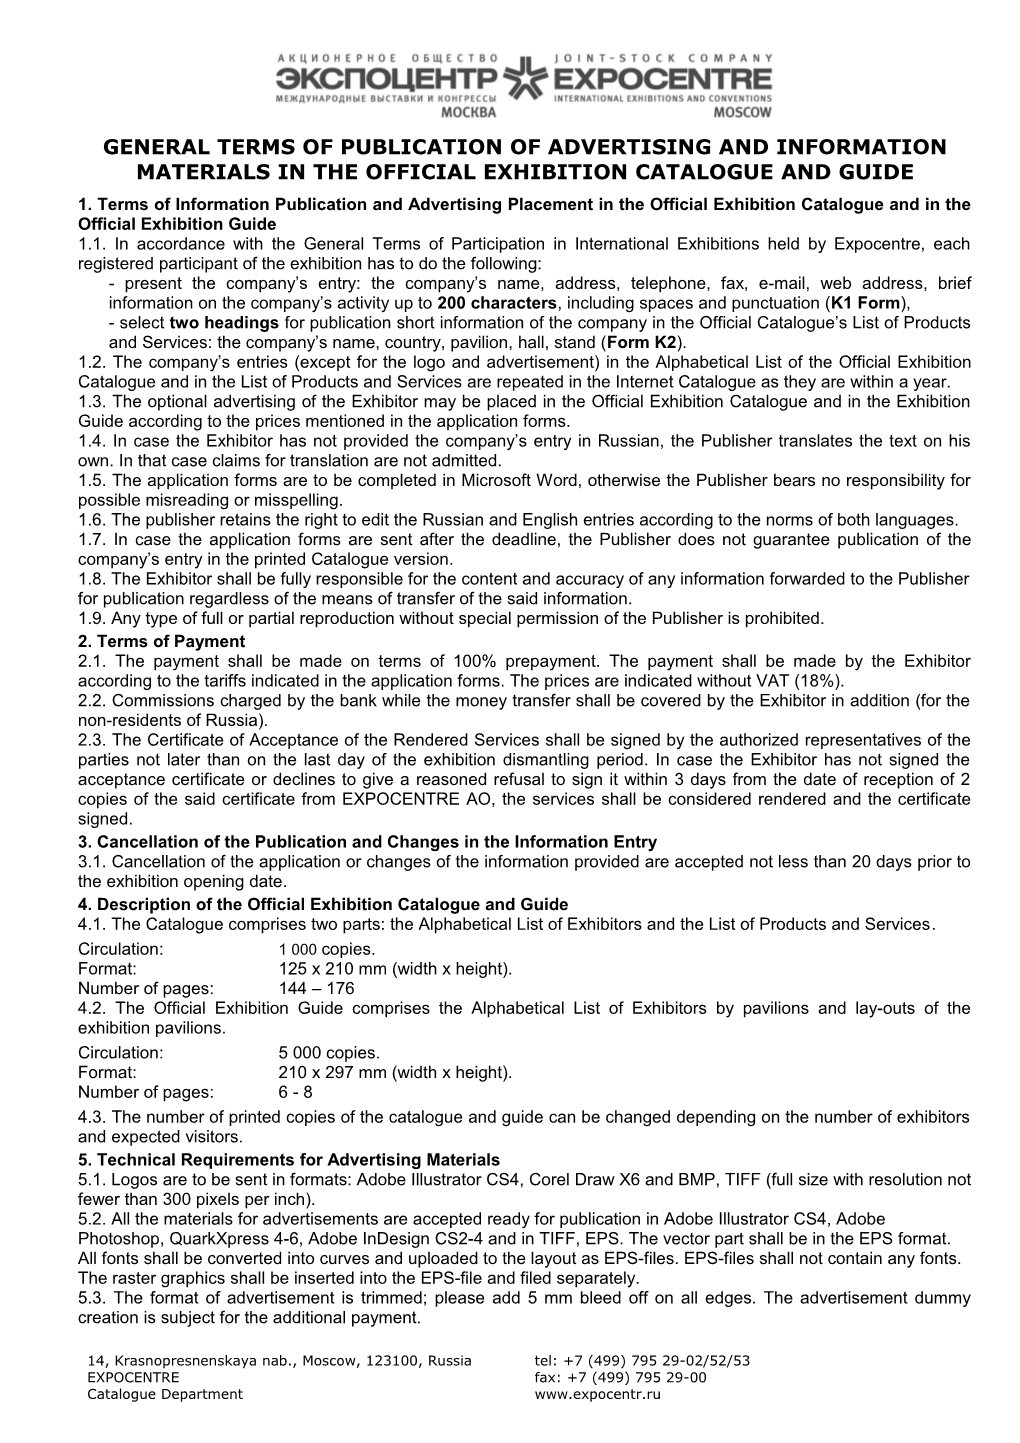 General Terms of Publication of Advertising and Information Materials in the Official s3